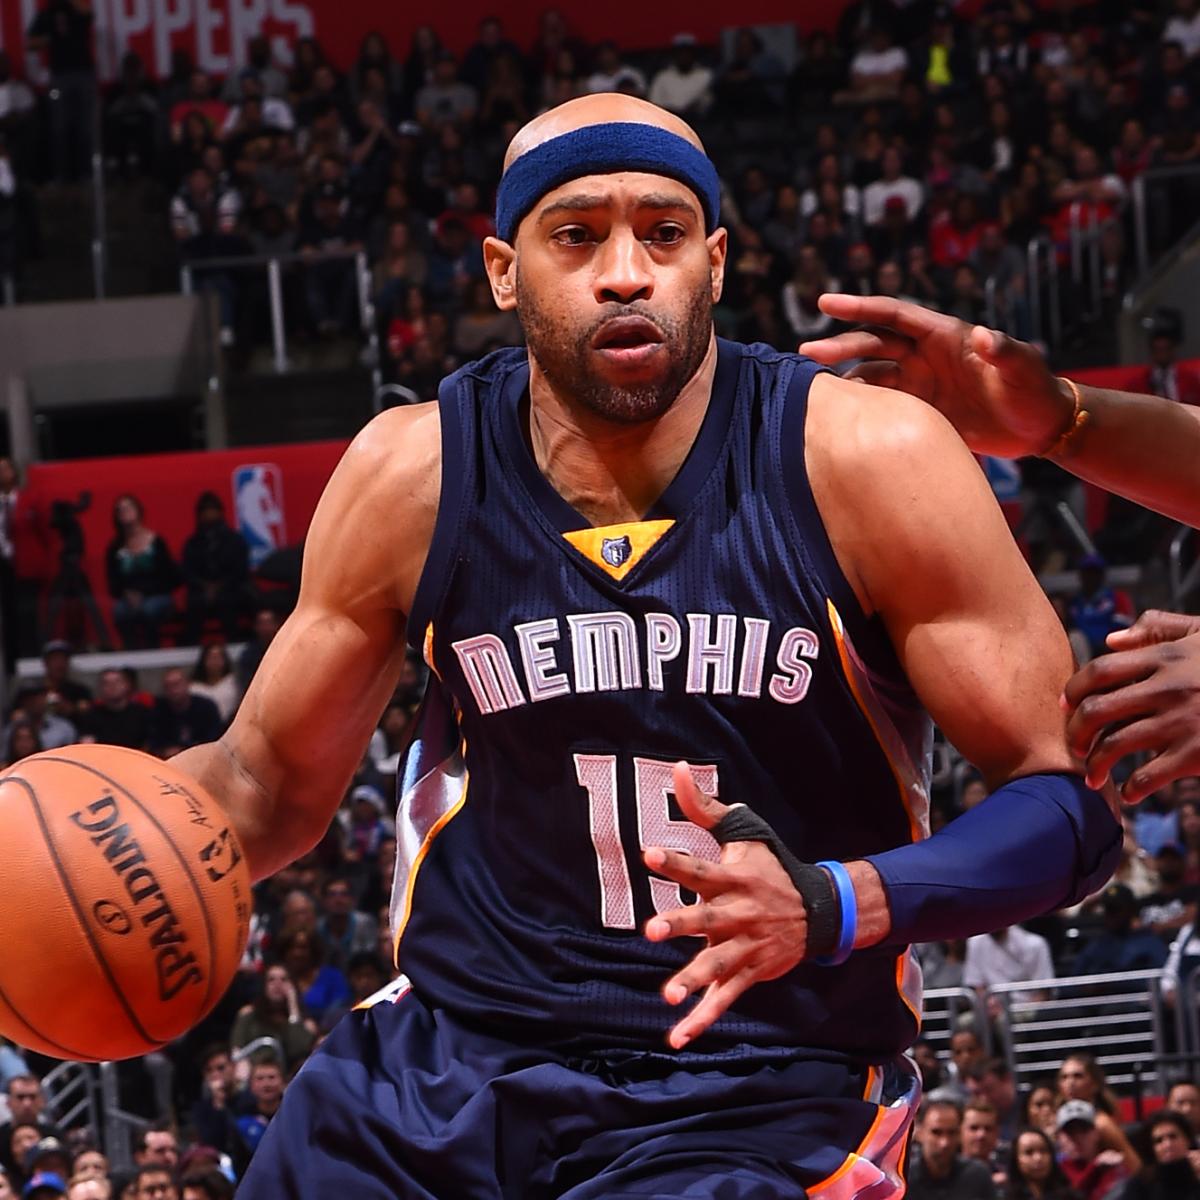 Vince Carter's take on high school athletes playing multiple sports